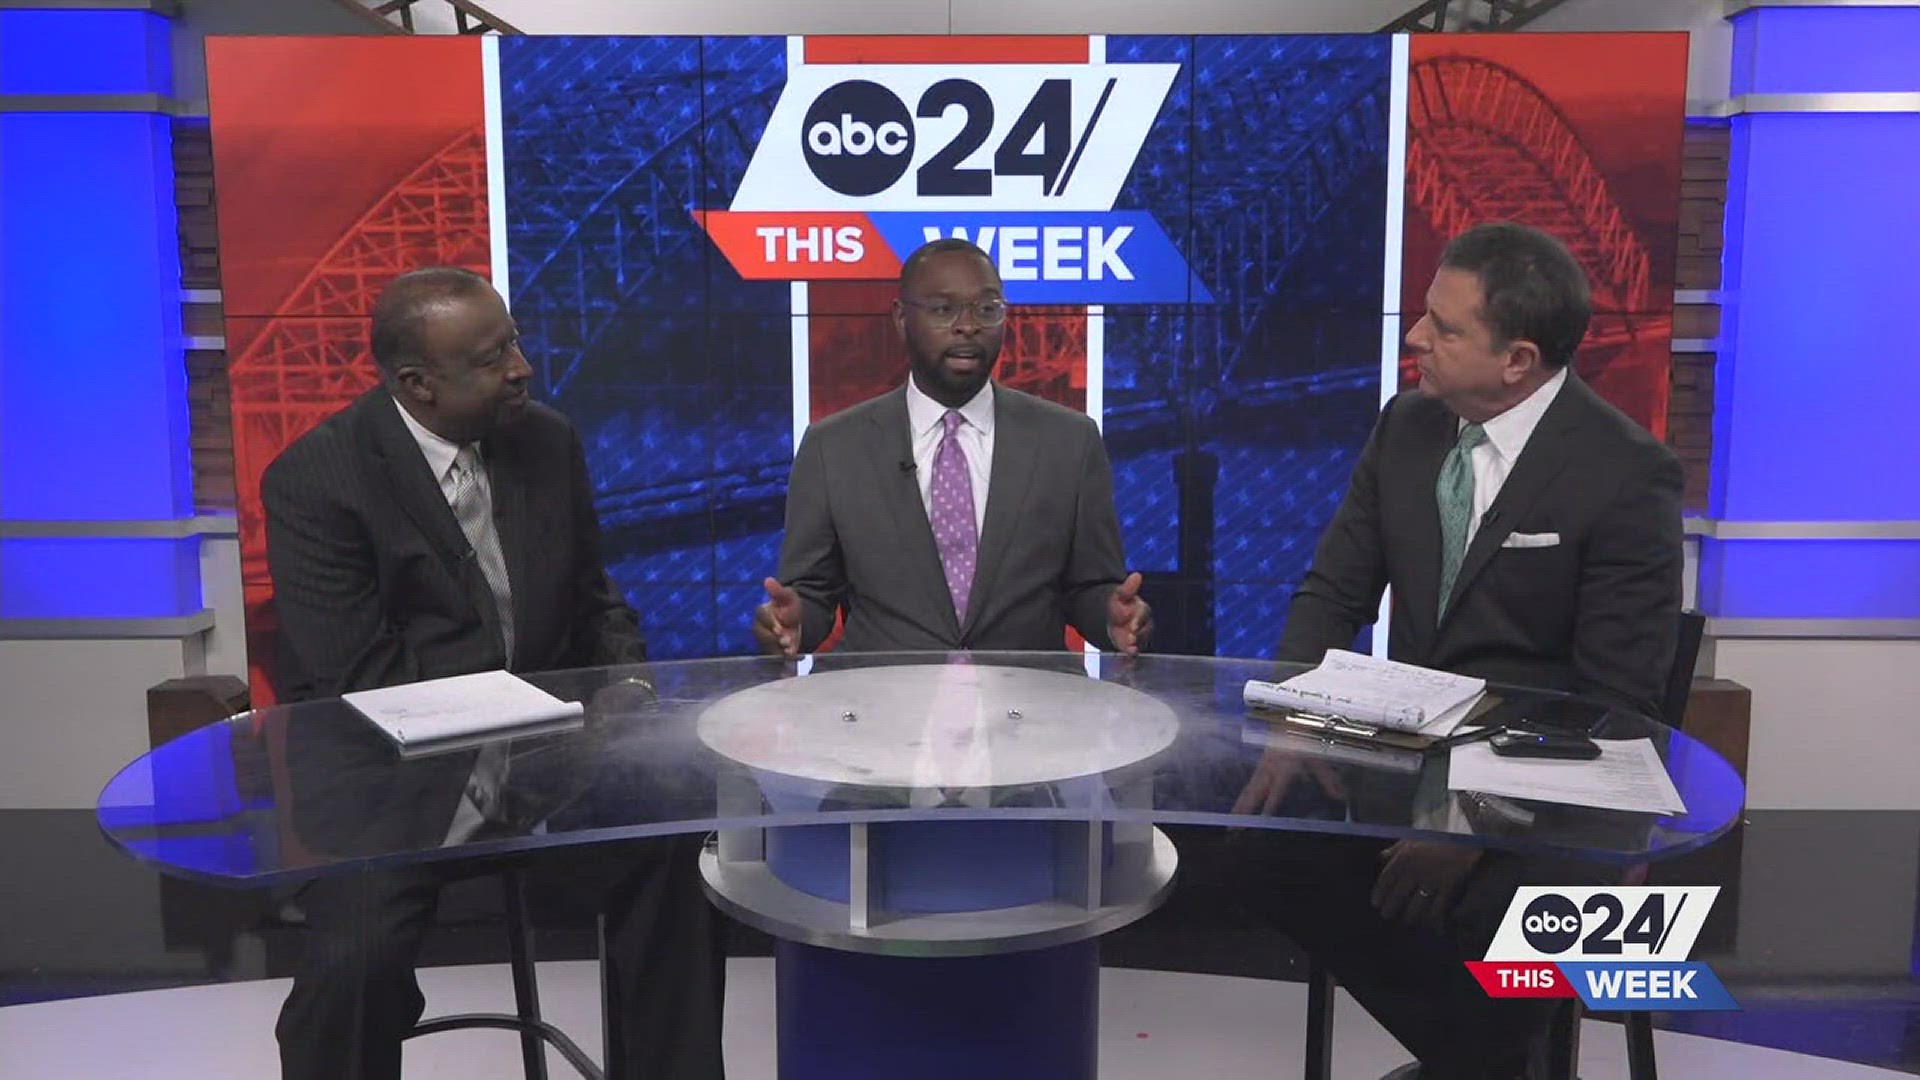 The day after winning the Memphis mayoral race, mayor-elect Paul Young stopped by ABC24 to discuss the future of Memphis with Richard Ransom and Otis Sanford.